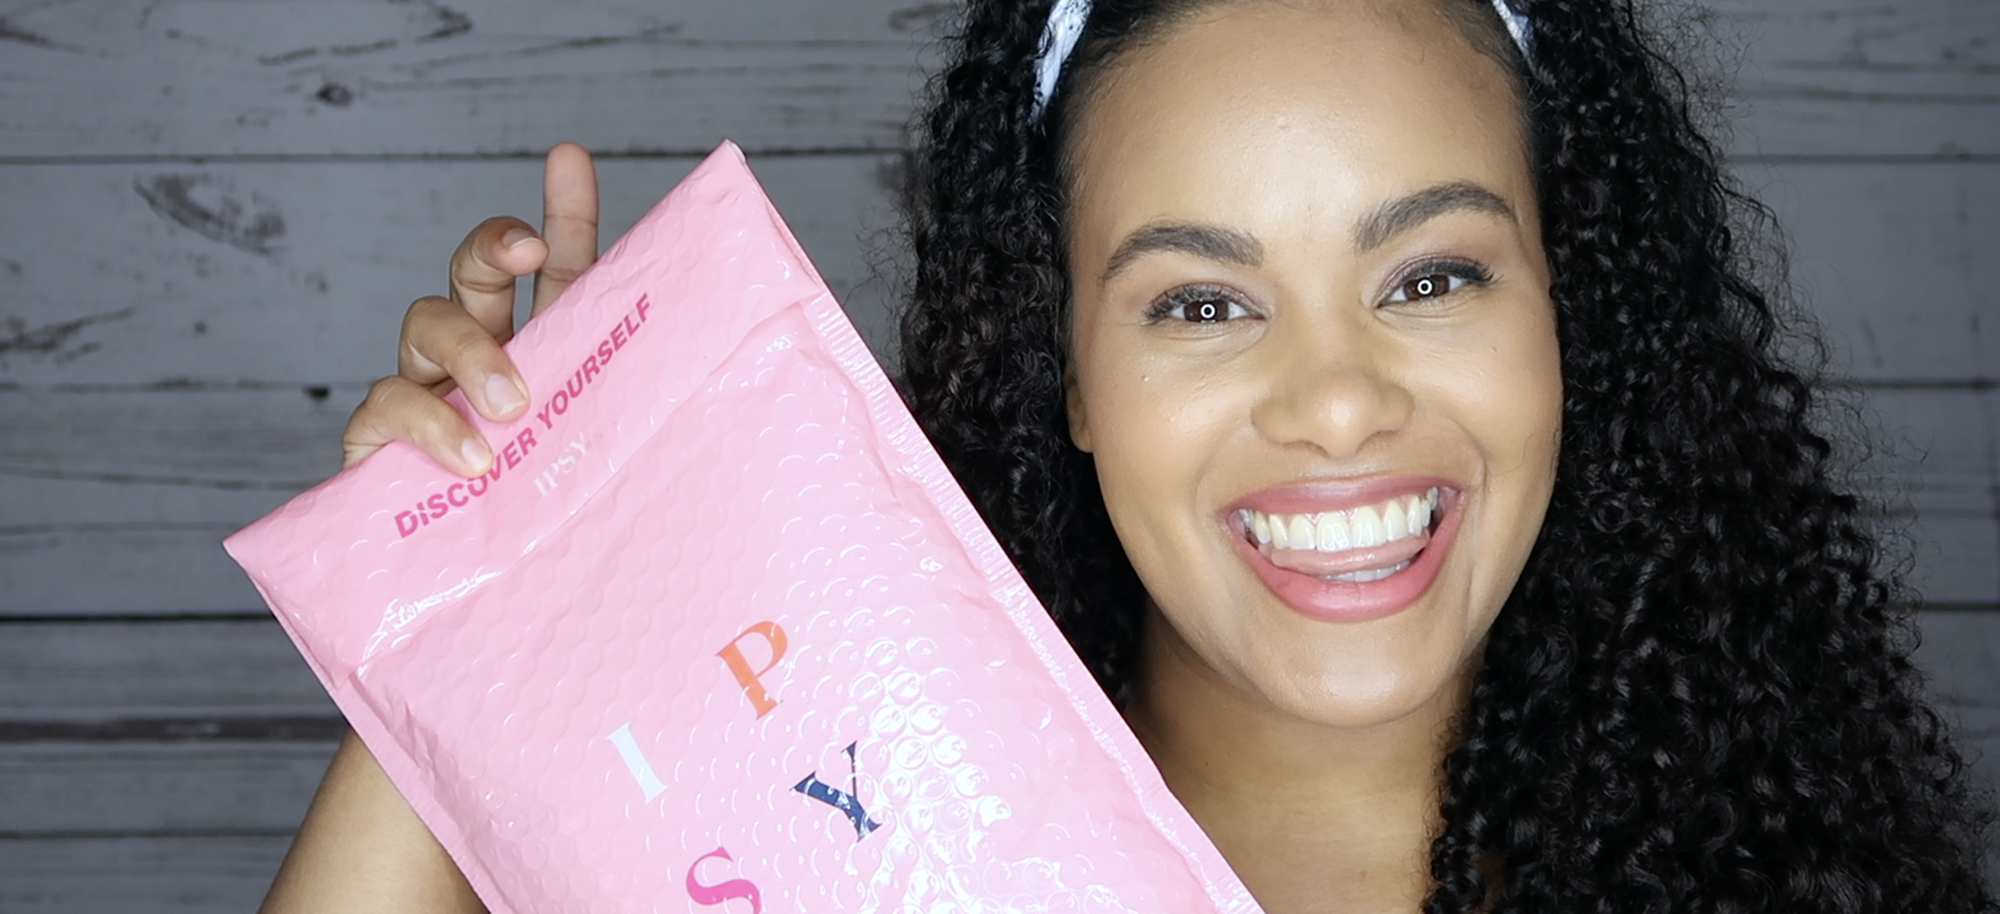 What’s In the Box: A New Unboxing Video Series with Naomi Pandolfi